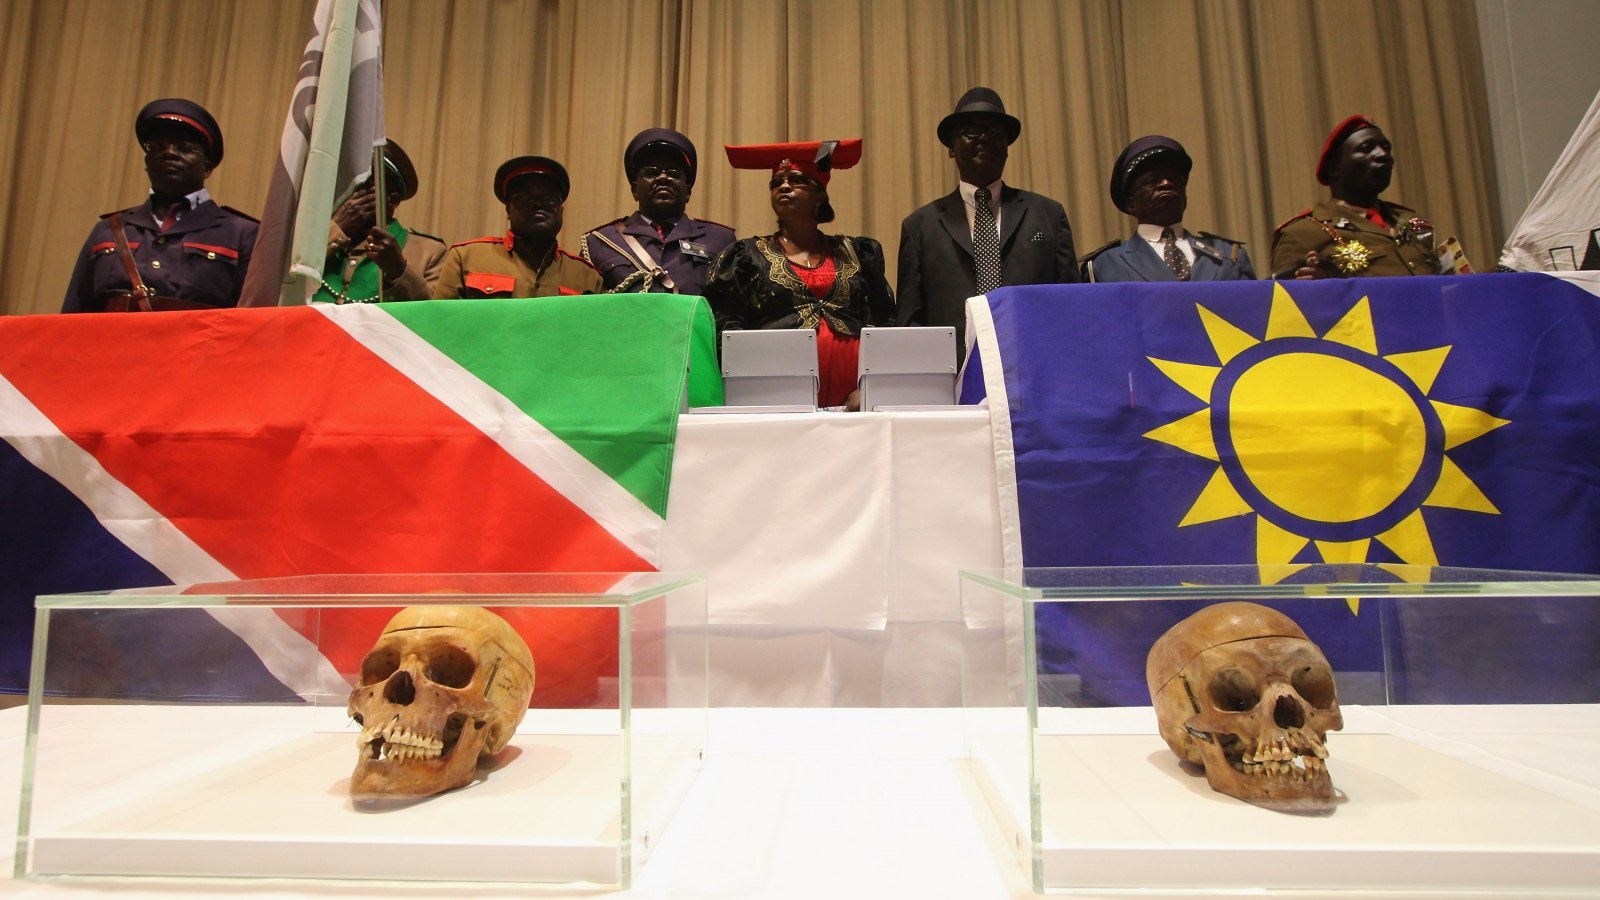 Namibia: Will Germany's talks over reparations for massacres in its former colony pave the way for justice?